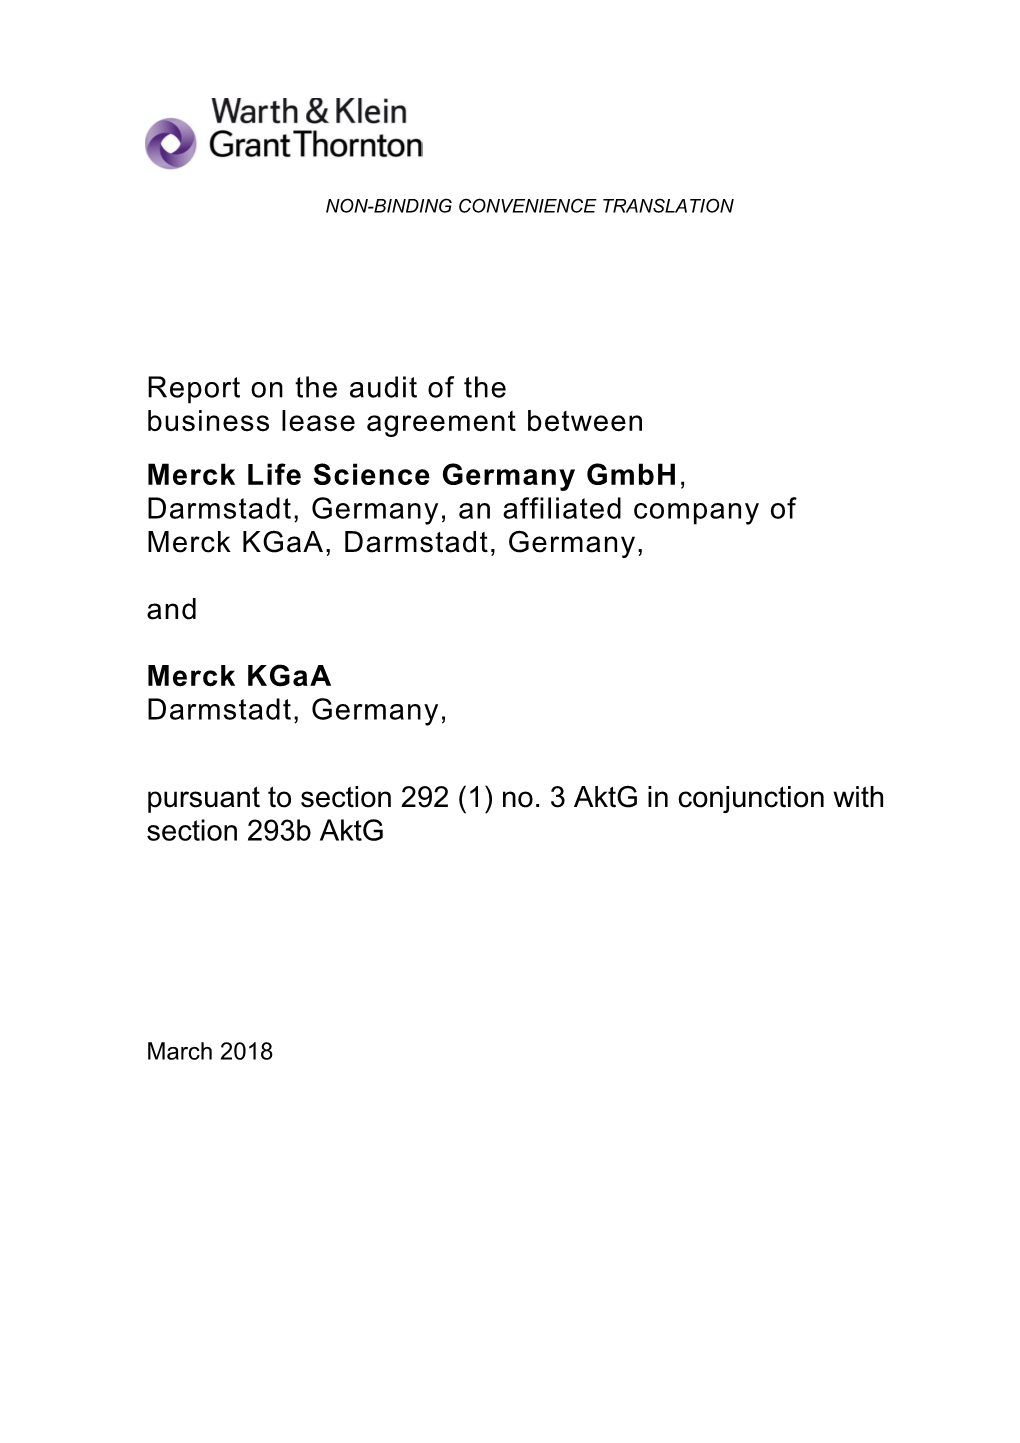 Report on the Audit of the Business Lease Agreement Between Merck